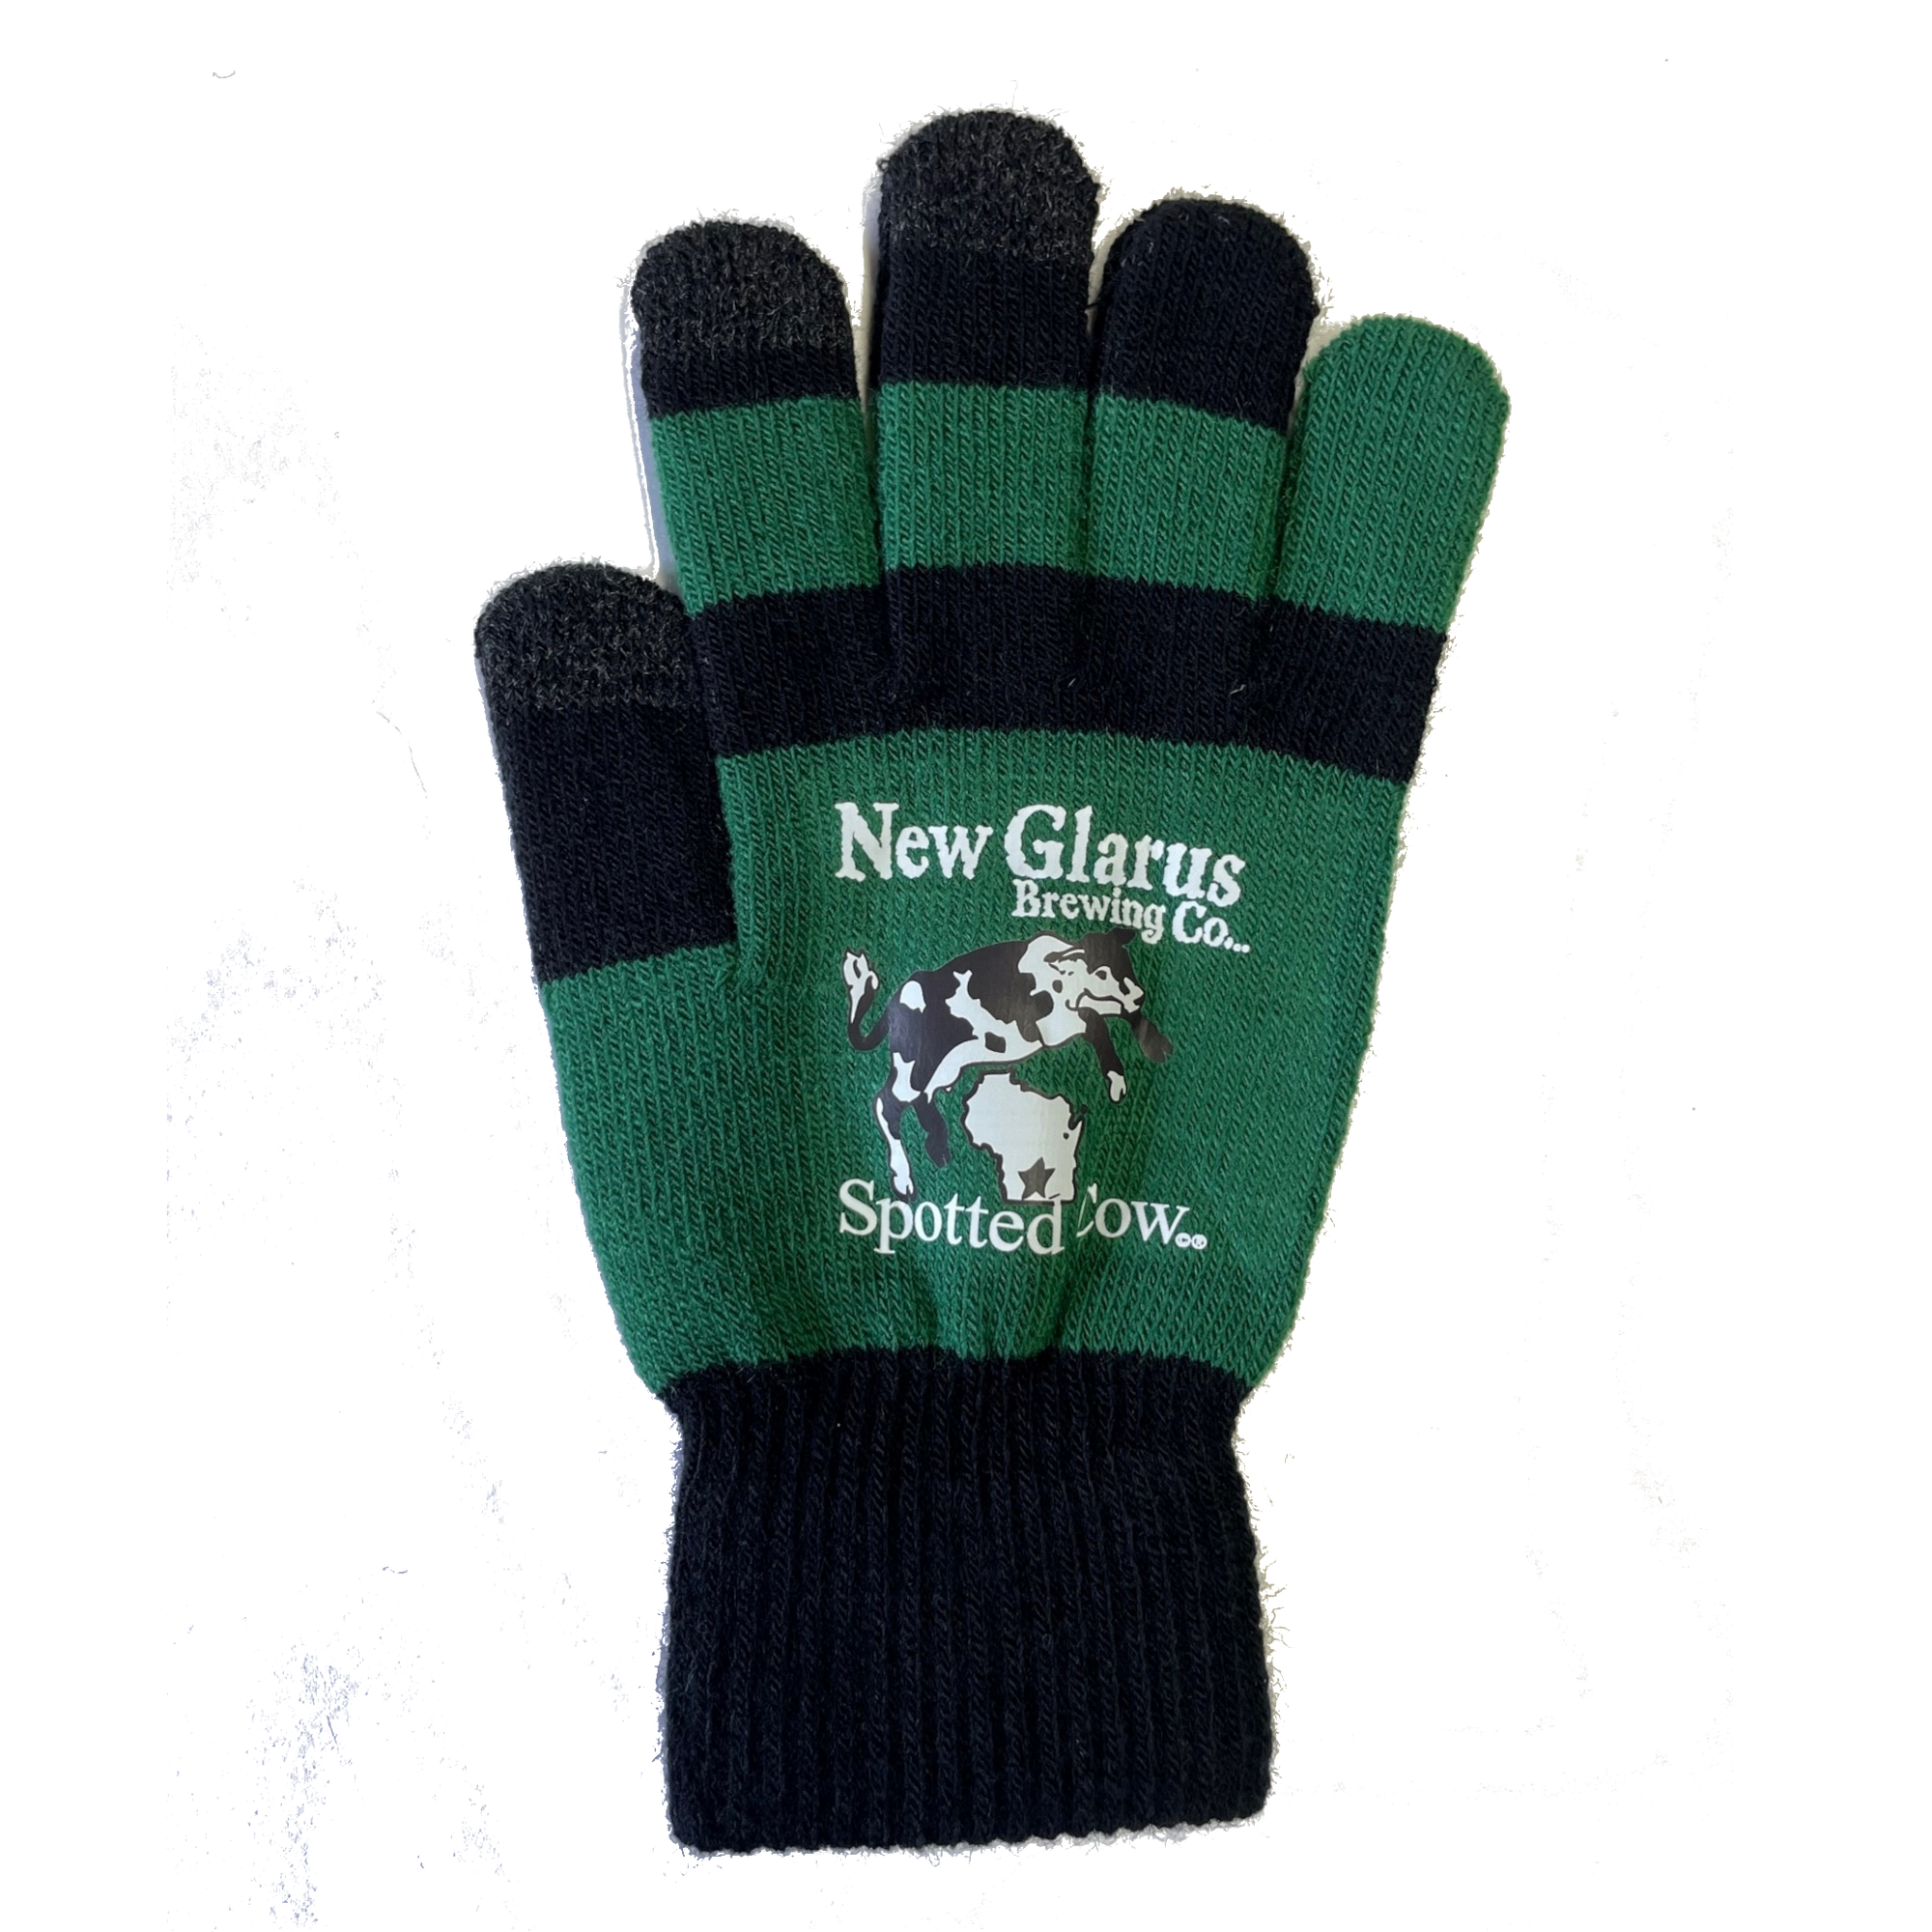 Dark green and black gloves with the Spotted Cow logo in black and white on the back.